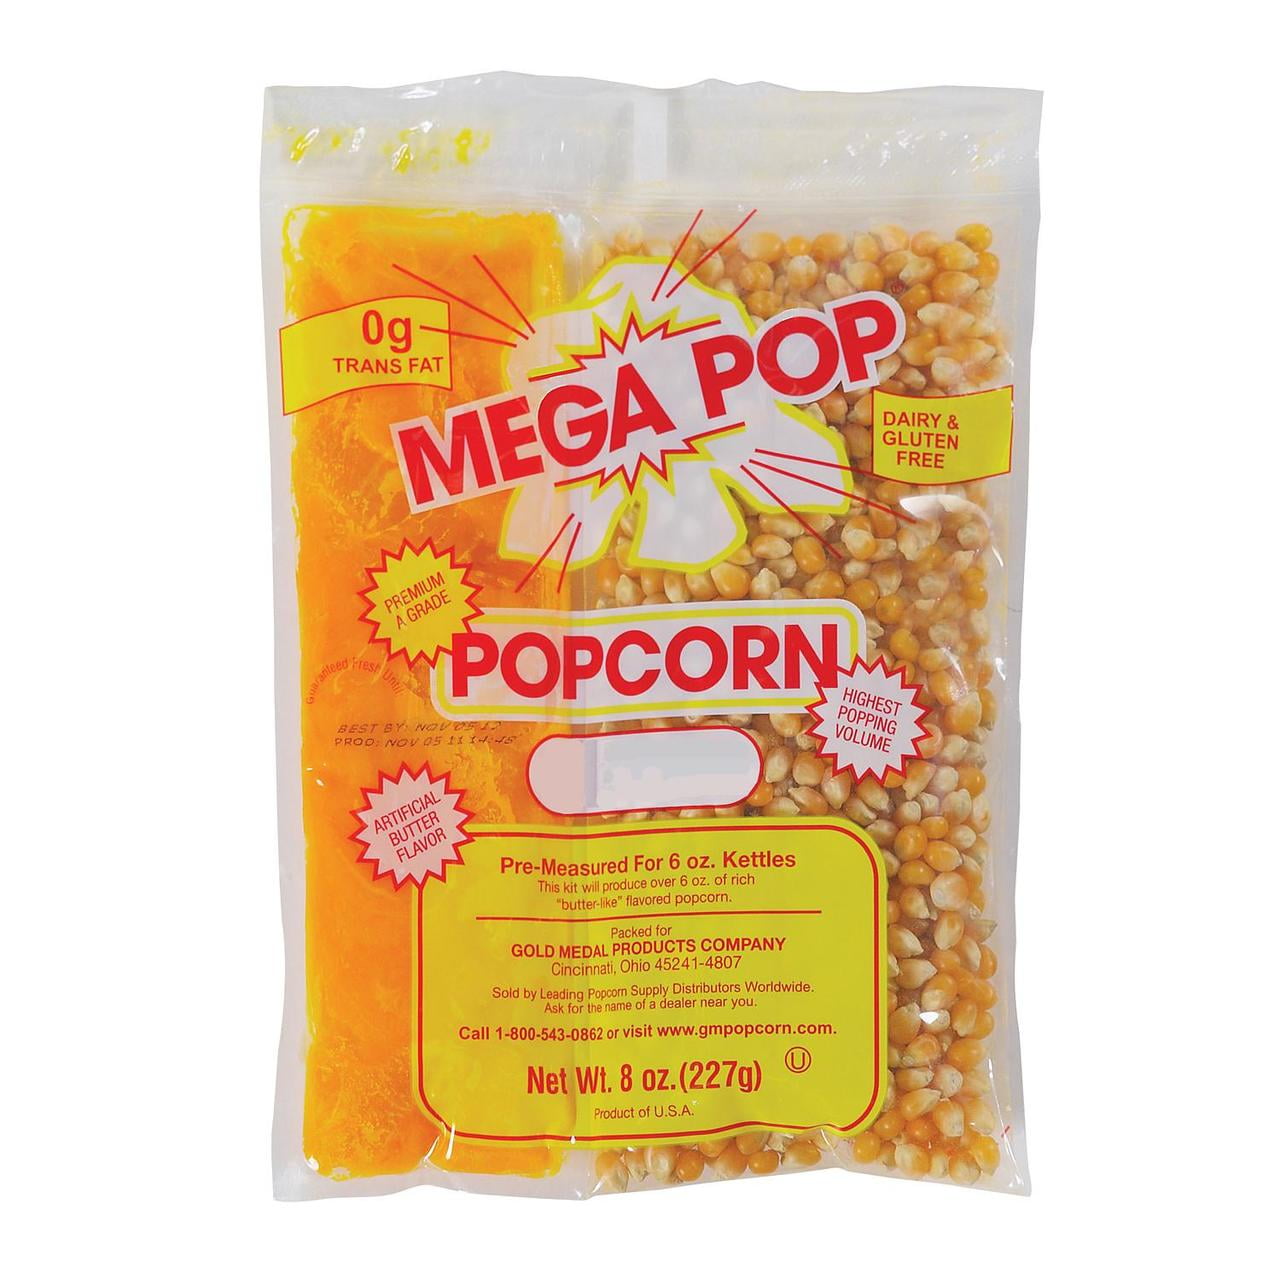 Gold Medal Real Movie Theater Popcorn Kit with Coconut Oil 8 oz., 24 pk. 